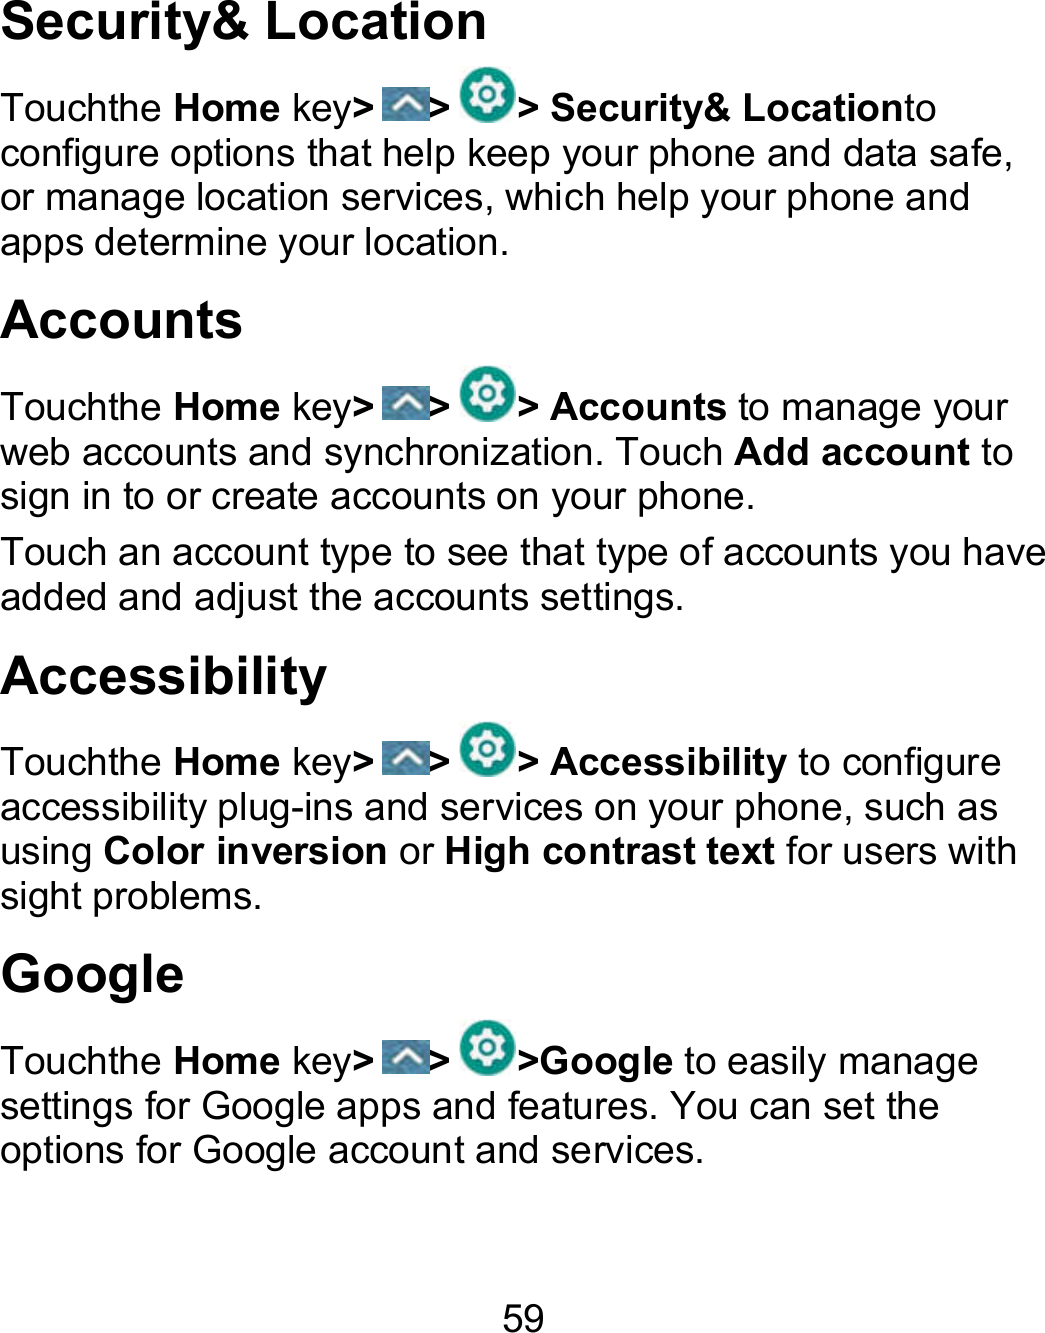 59 Security&amp; Location Touchthe Home key&gt; &gt; &gt; Security&amp; Locationto configure options that help keep your phone and data safe, or manage location services, which help your phone and apps determine your location. Accounts Touchthe Home key&gt; &gt; &gt; Accounts to manage your web accounts and synchronization. Touch Add account to sign in to or create accounts on your phone. Touch an account type to see that type of accounts you have added and adjust the accounts settings. Accessibility Touchthe Home key&gt; &gt; &gt; Accessibility to configure accessibility plug-ins and services on your phone, such as using Color inversion or High contrast text for users with sight problems. Google Touchthe Home key&gt; &gt; &gt;Google to easily manage settings for Google apps and features. You can set the options for Google account and services. 